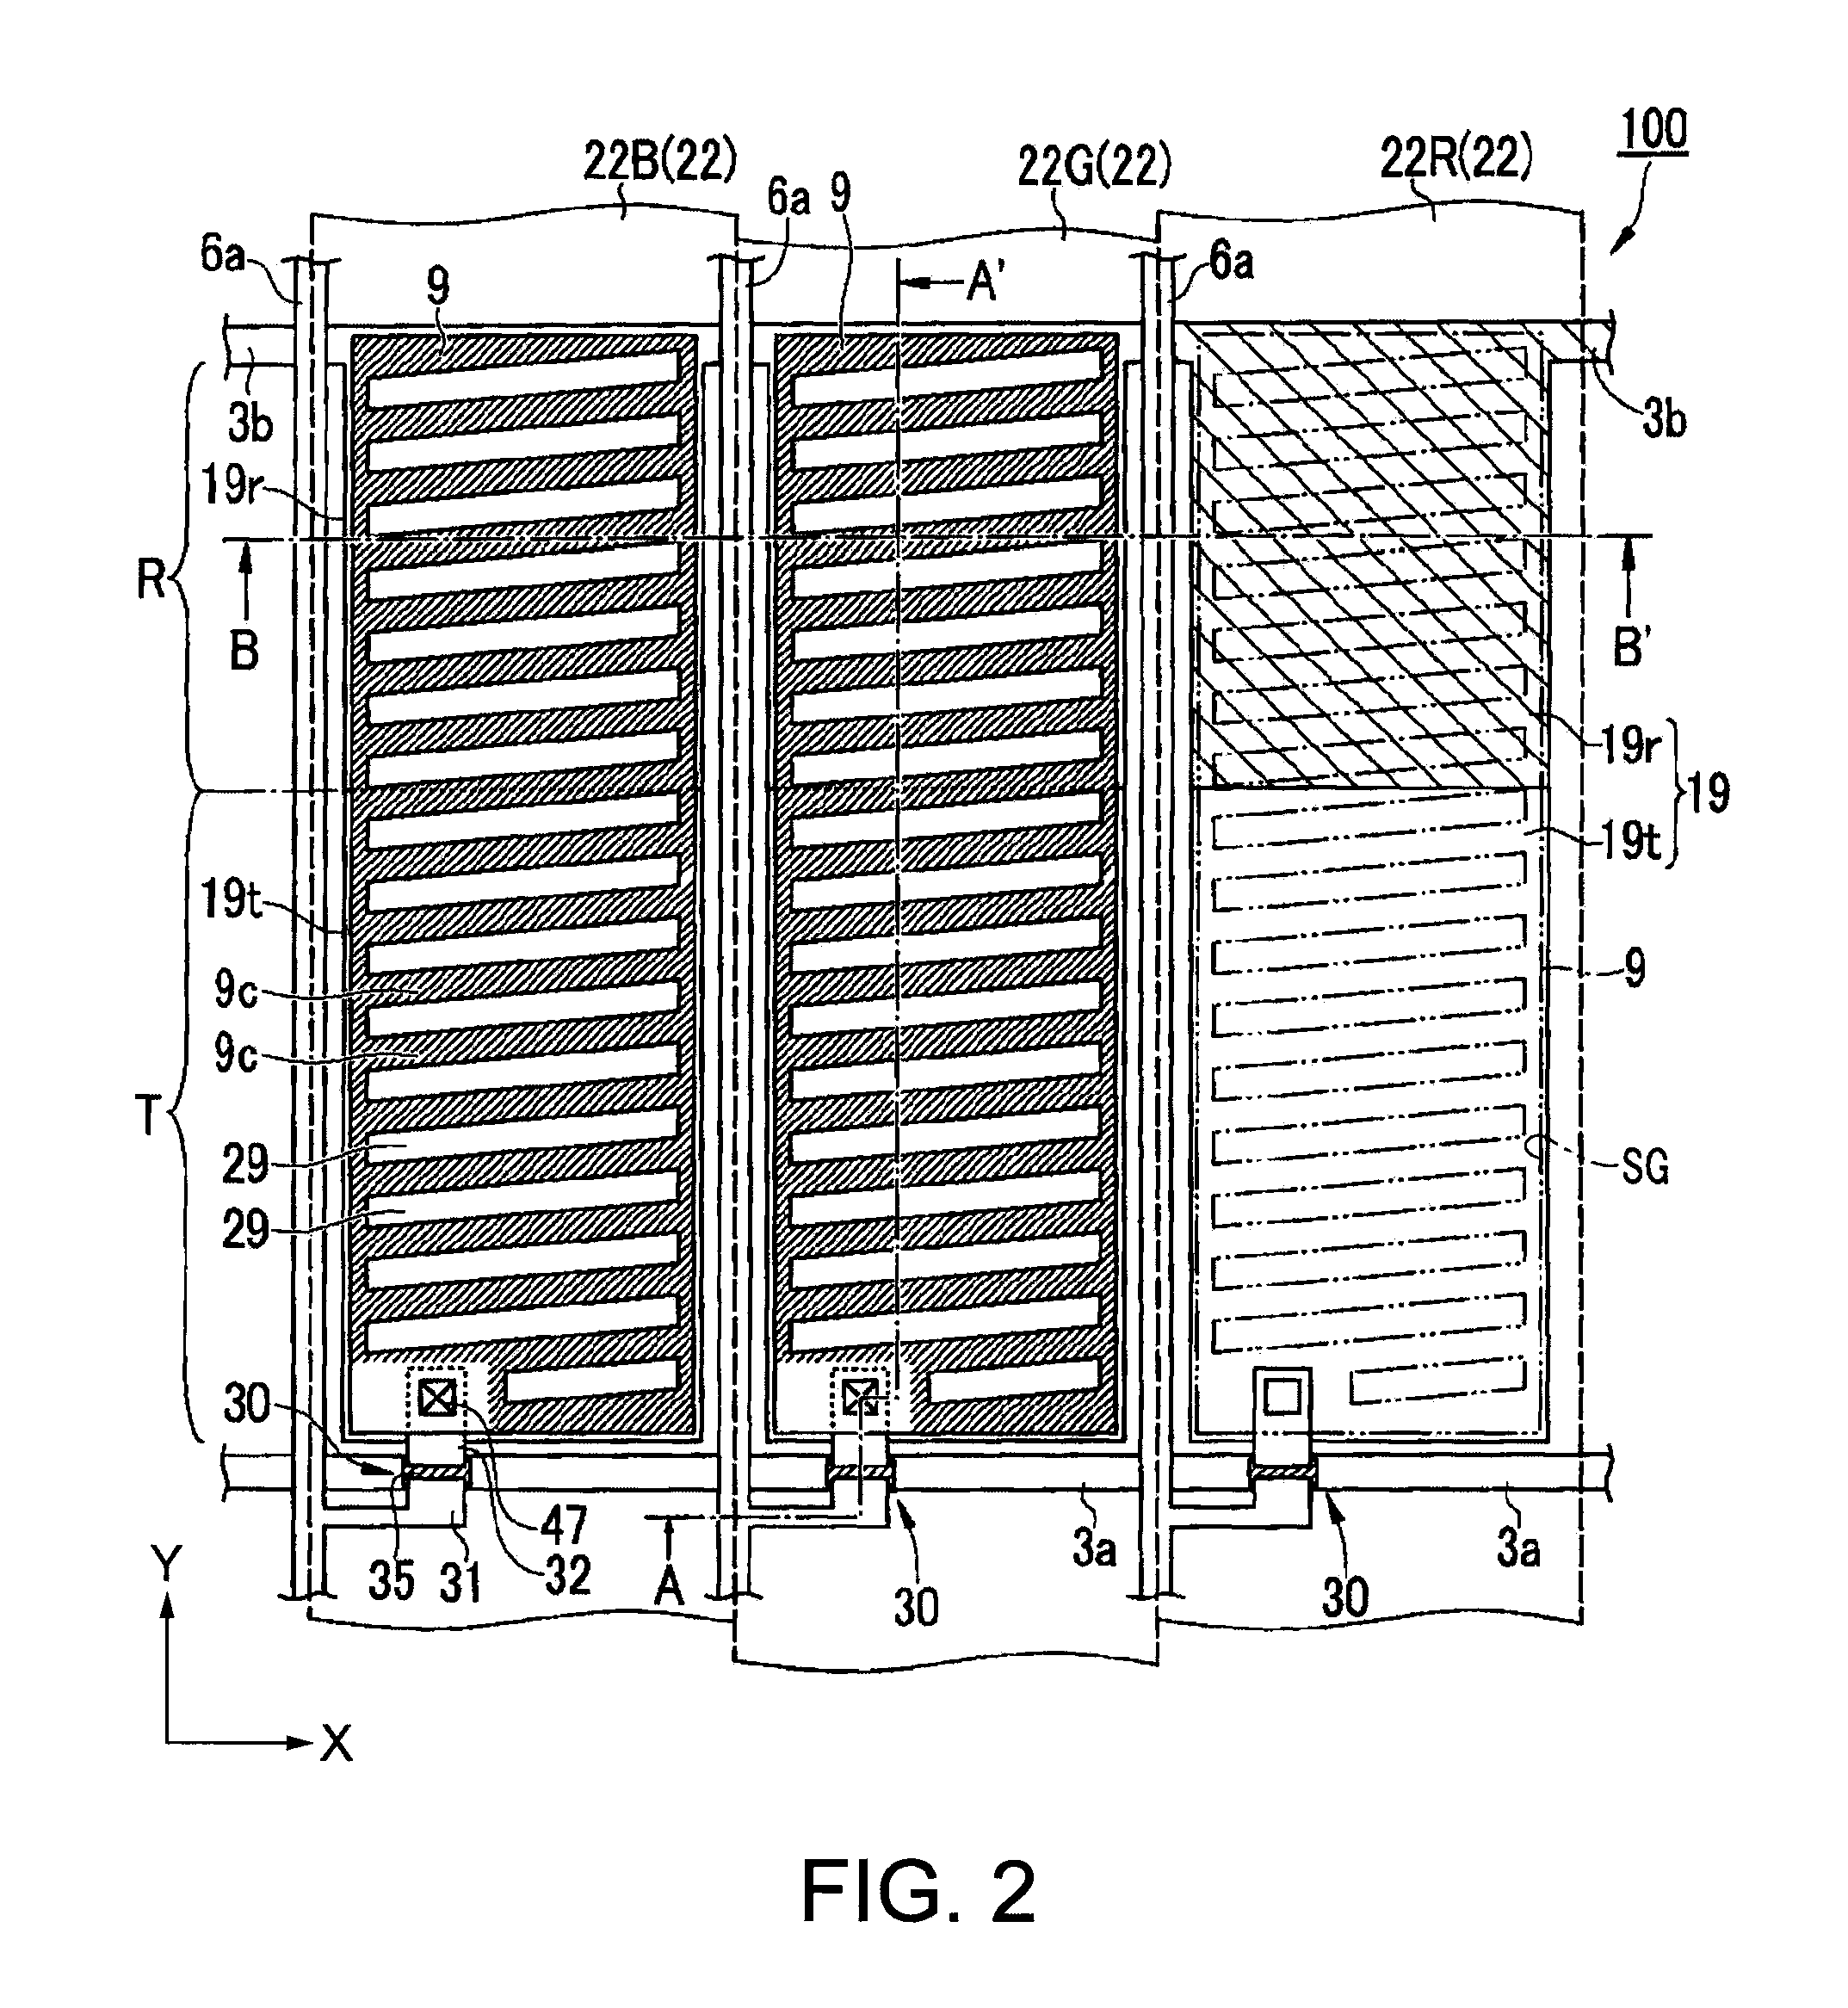 Liquid crystal device, method for producing the same, and electronic apparatus